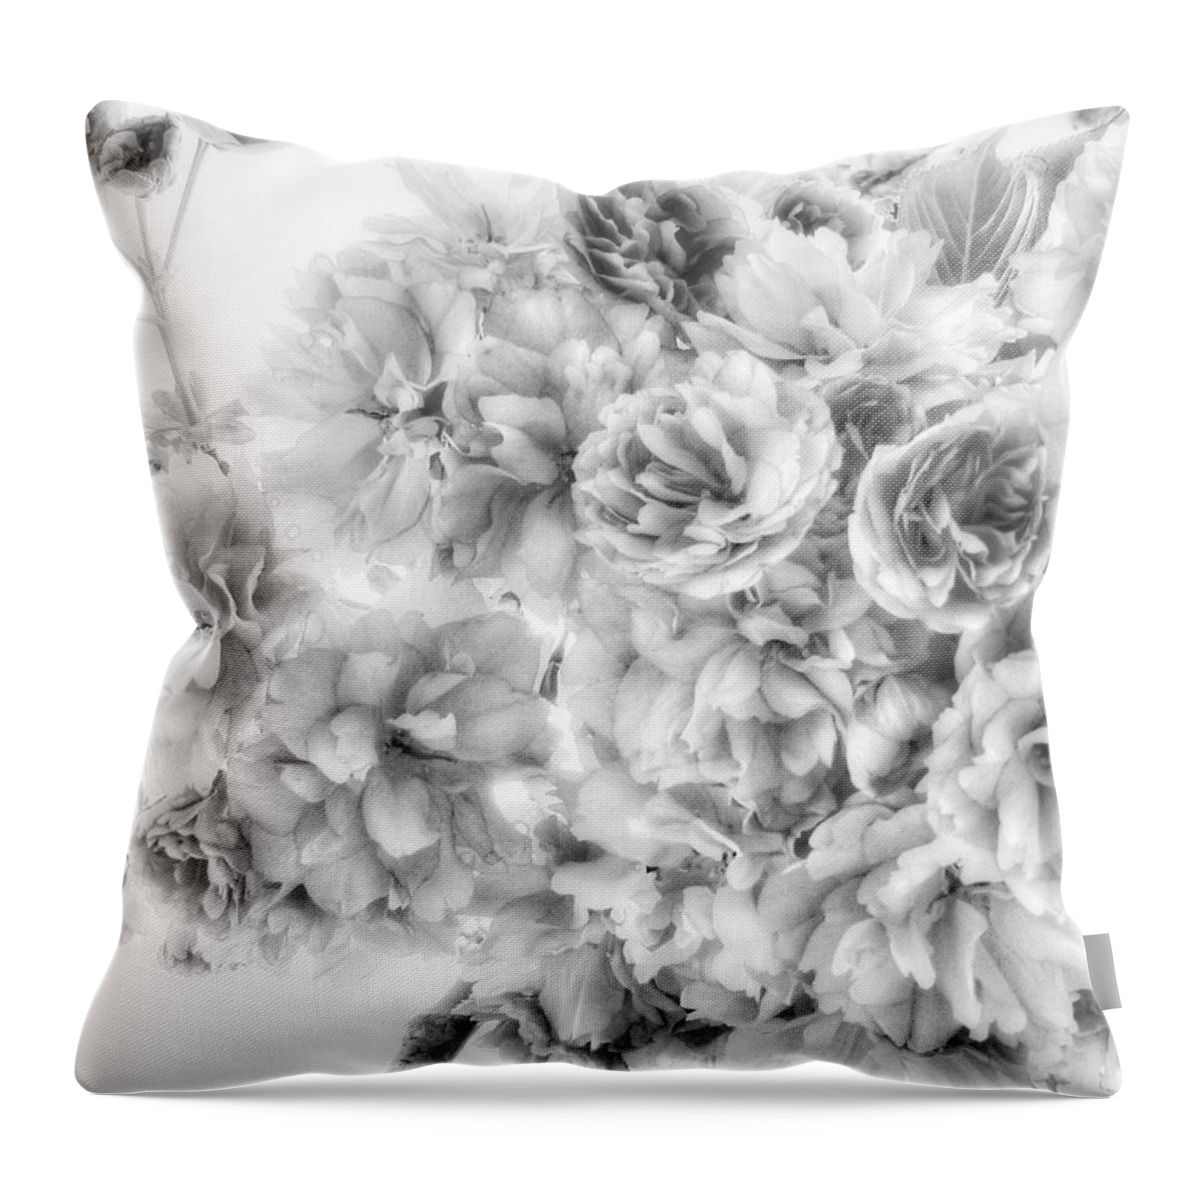 Connie Handscomb Throw Pillow featuring the photograph In Vogue by Connie Handscomb